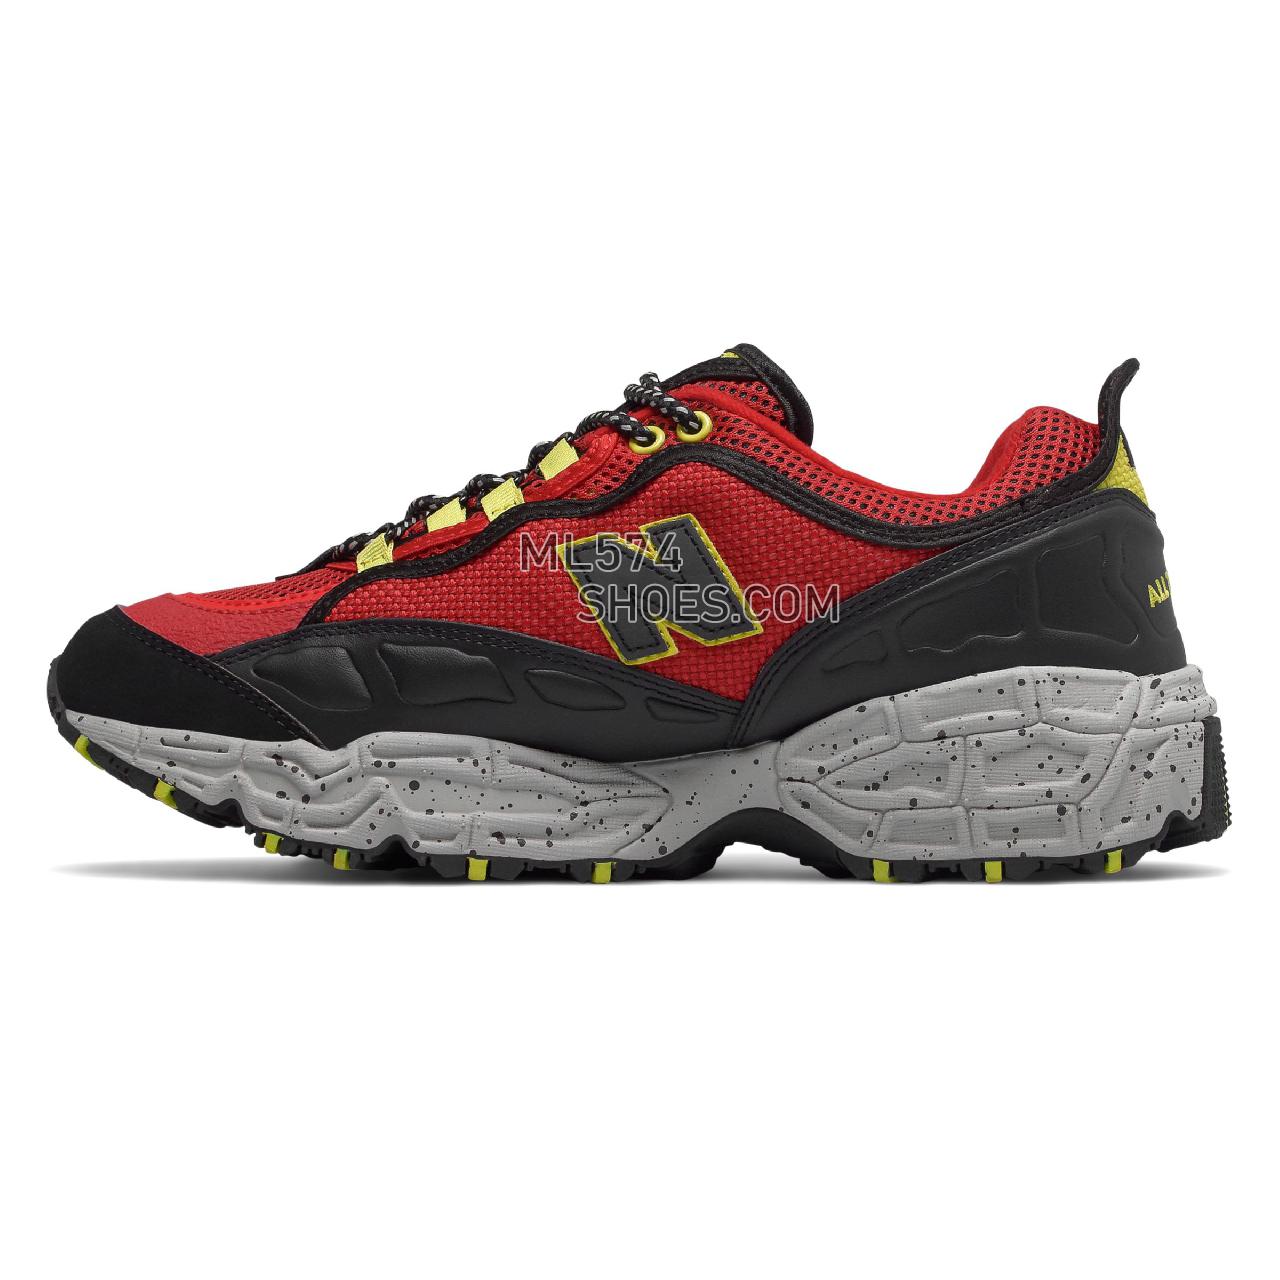 New Balance 801 - Men's Classic Sneakers - Team Red with Black - ML801GLE